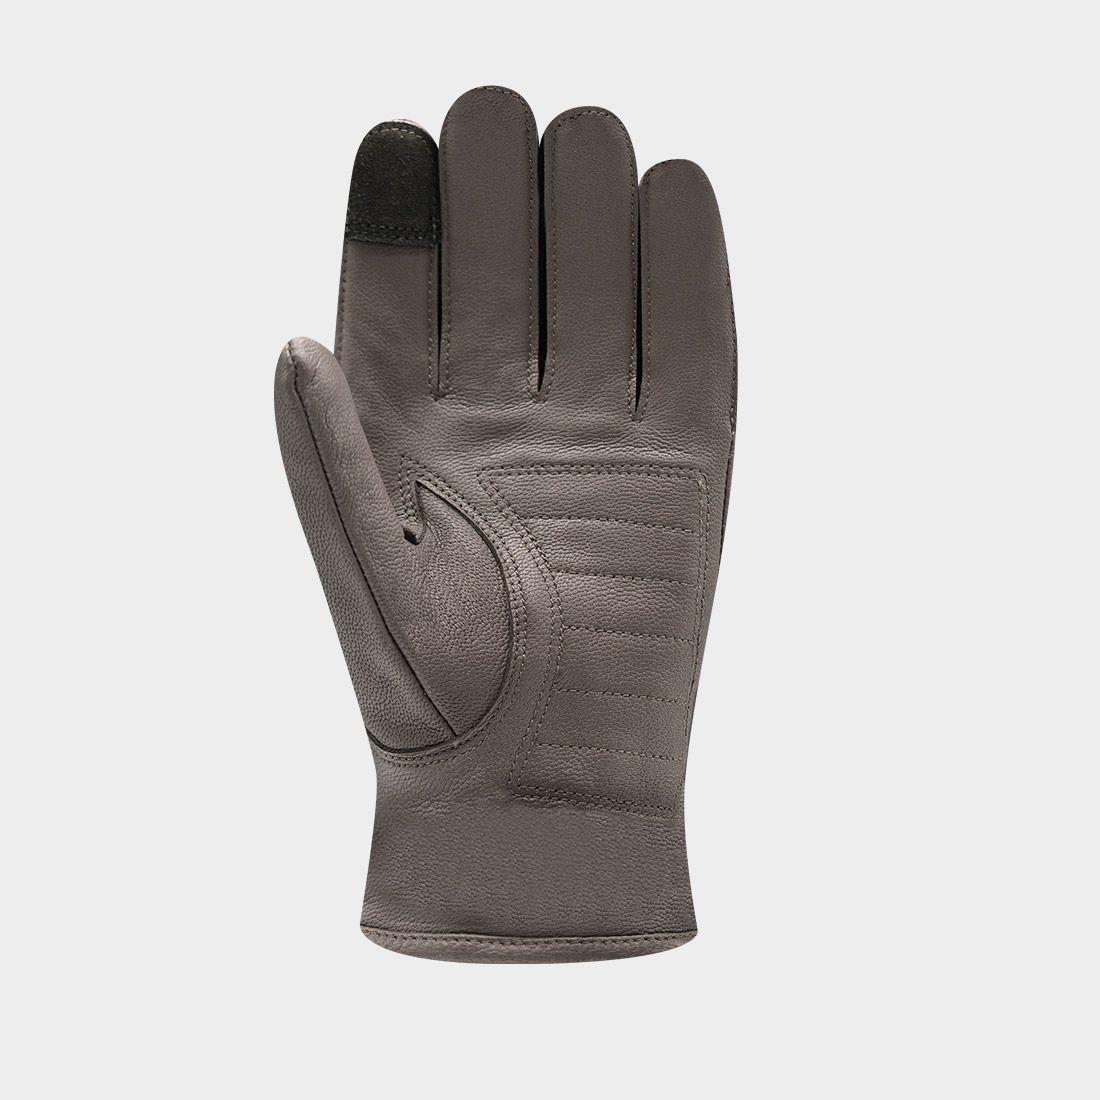 RESIDENT 2 - MOTORCYCLE GLOVES